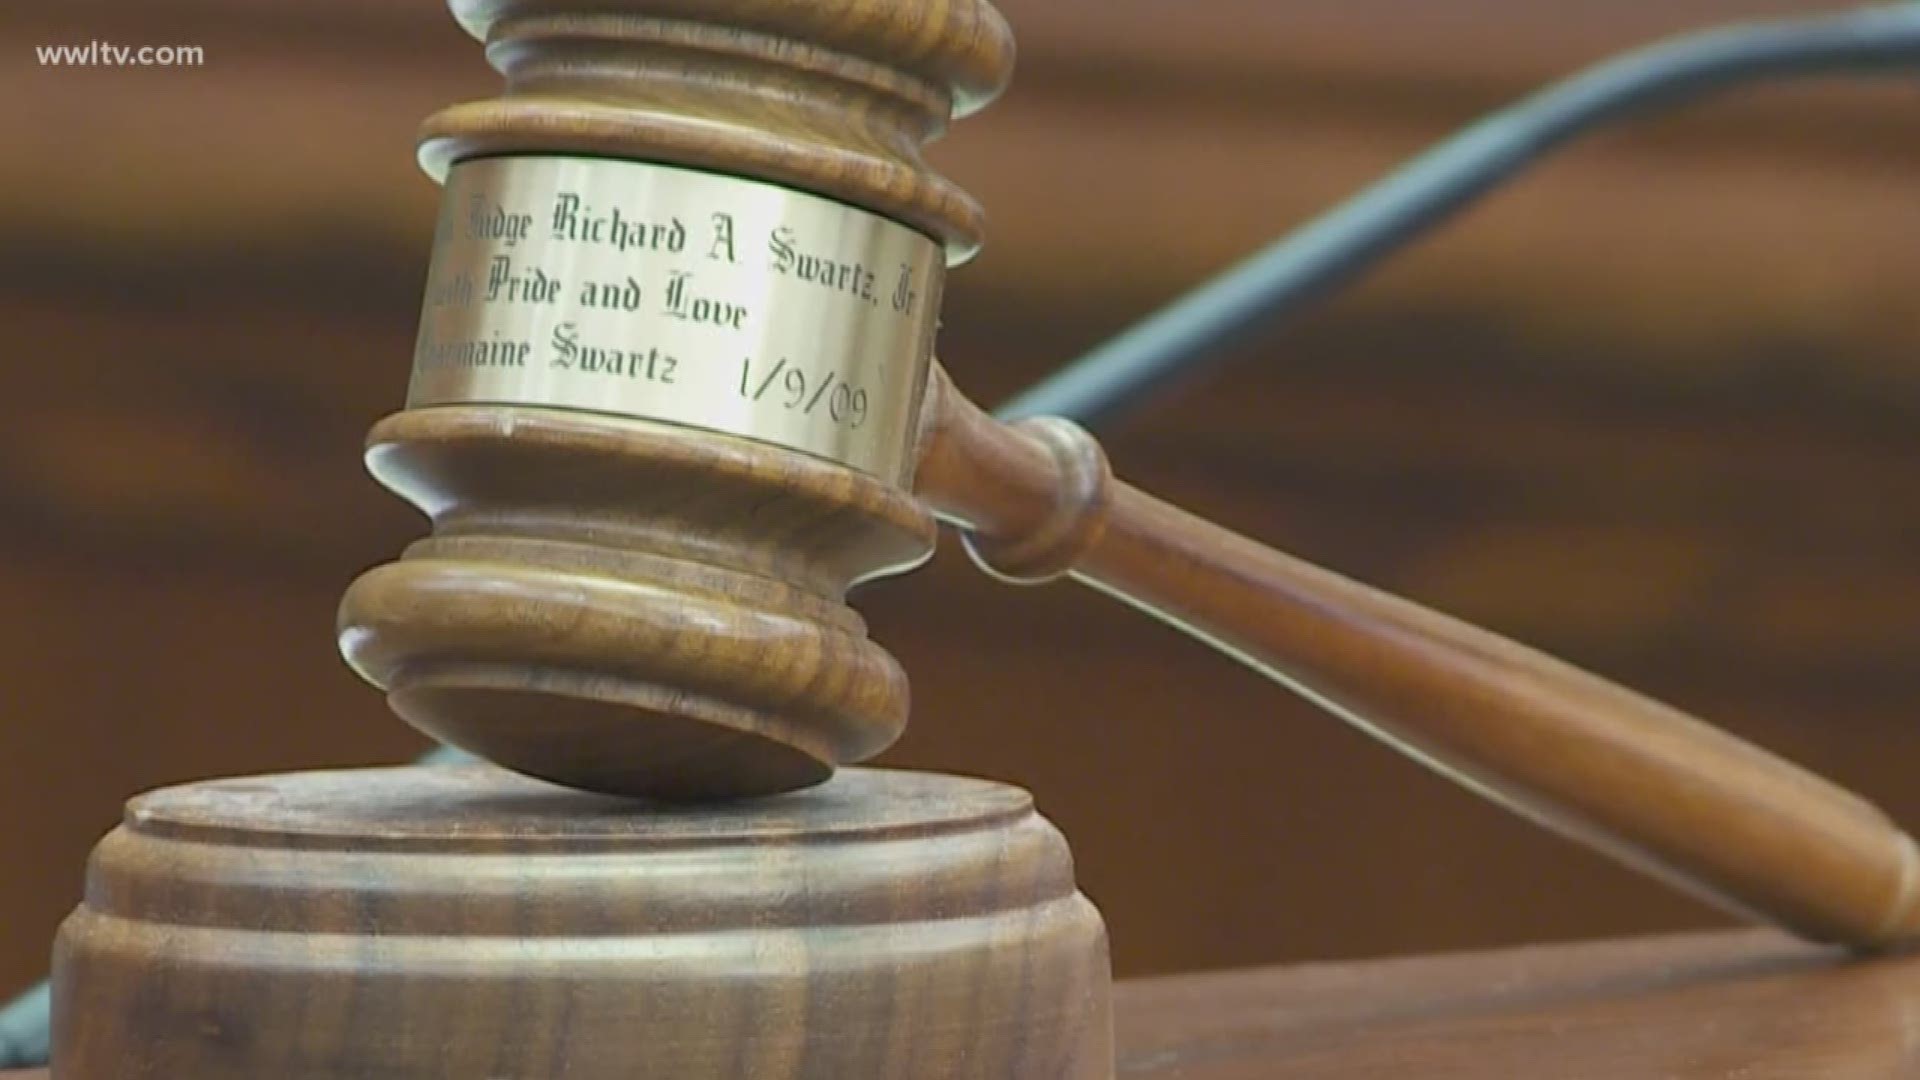 Some courts were open Friday in St. Tammany, despite the heavy northshore snow and several courts being closed, now, warrants have been issued for those who didn't show up for their cases. 